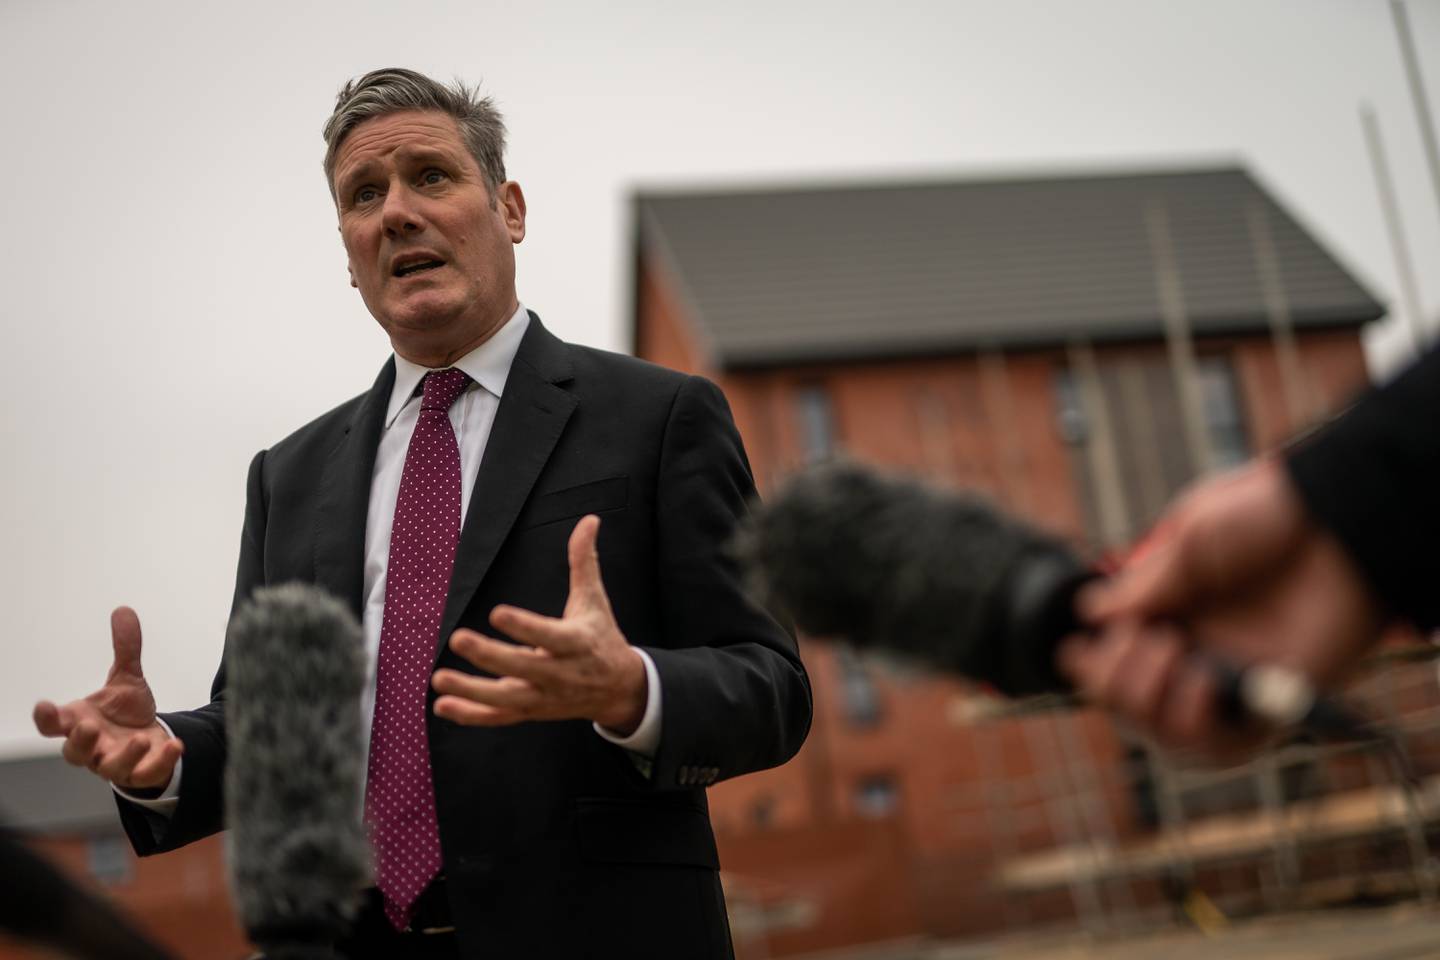 Labour leader Keir Starmer would like to see the upper house of UK Parliament reconstituted. PA Wire